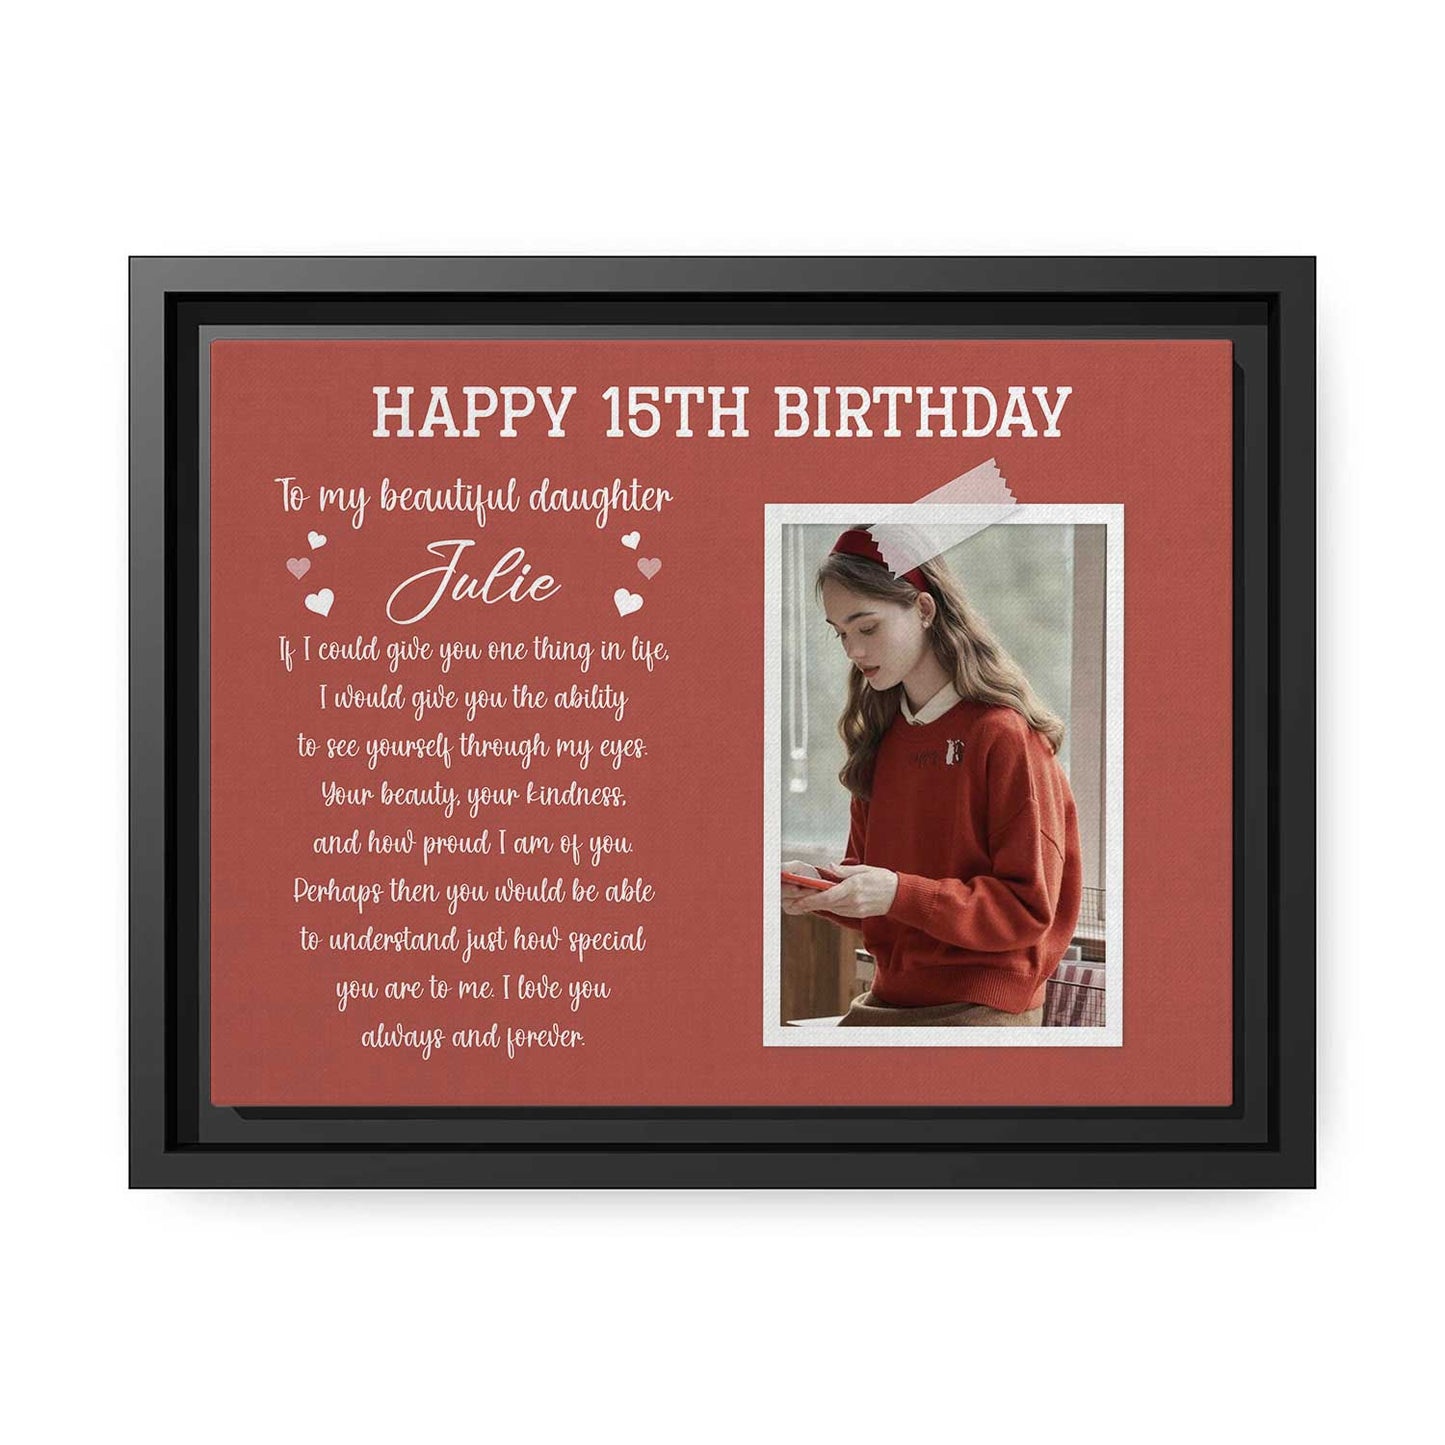 Happy 15th Birthday - Personalized 15th Birthday gift For Daughter - Custom Canvas Print - MyMindfulGifts